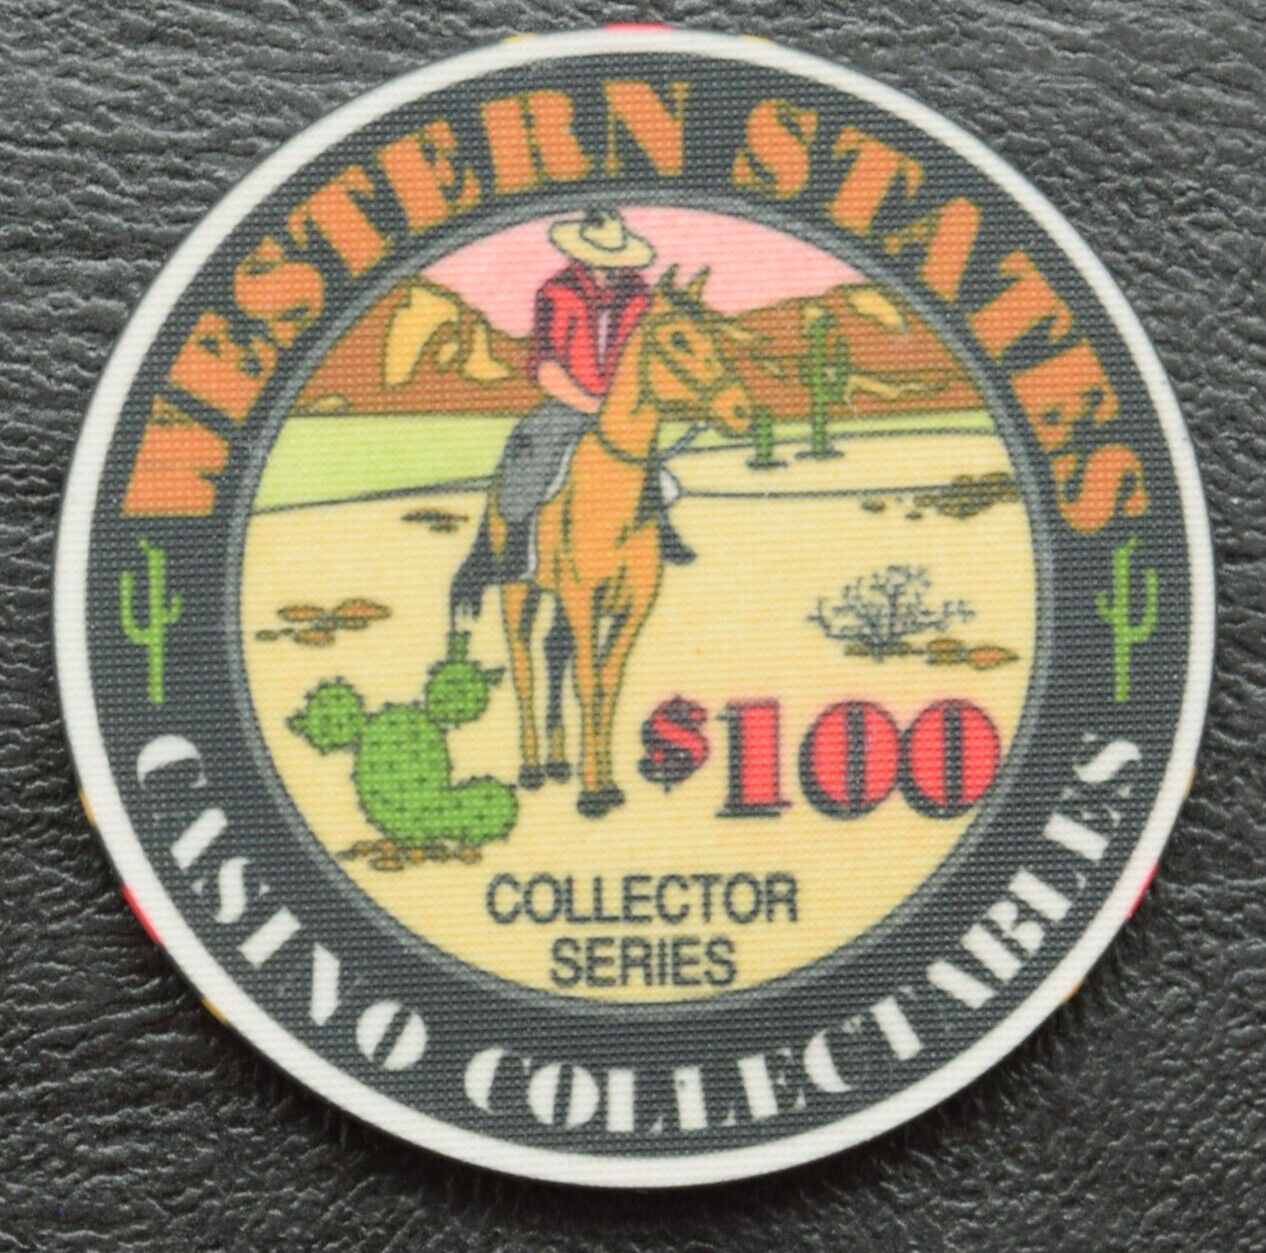 Western States Casino Collectibles $100 Collector Series Ceramic Poker Chip